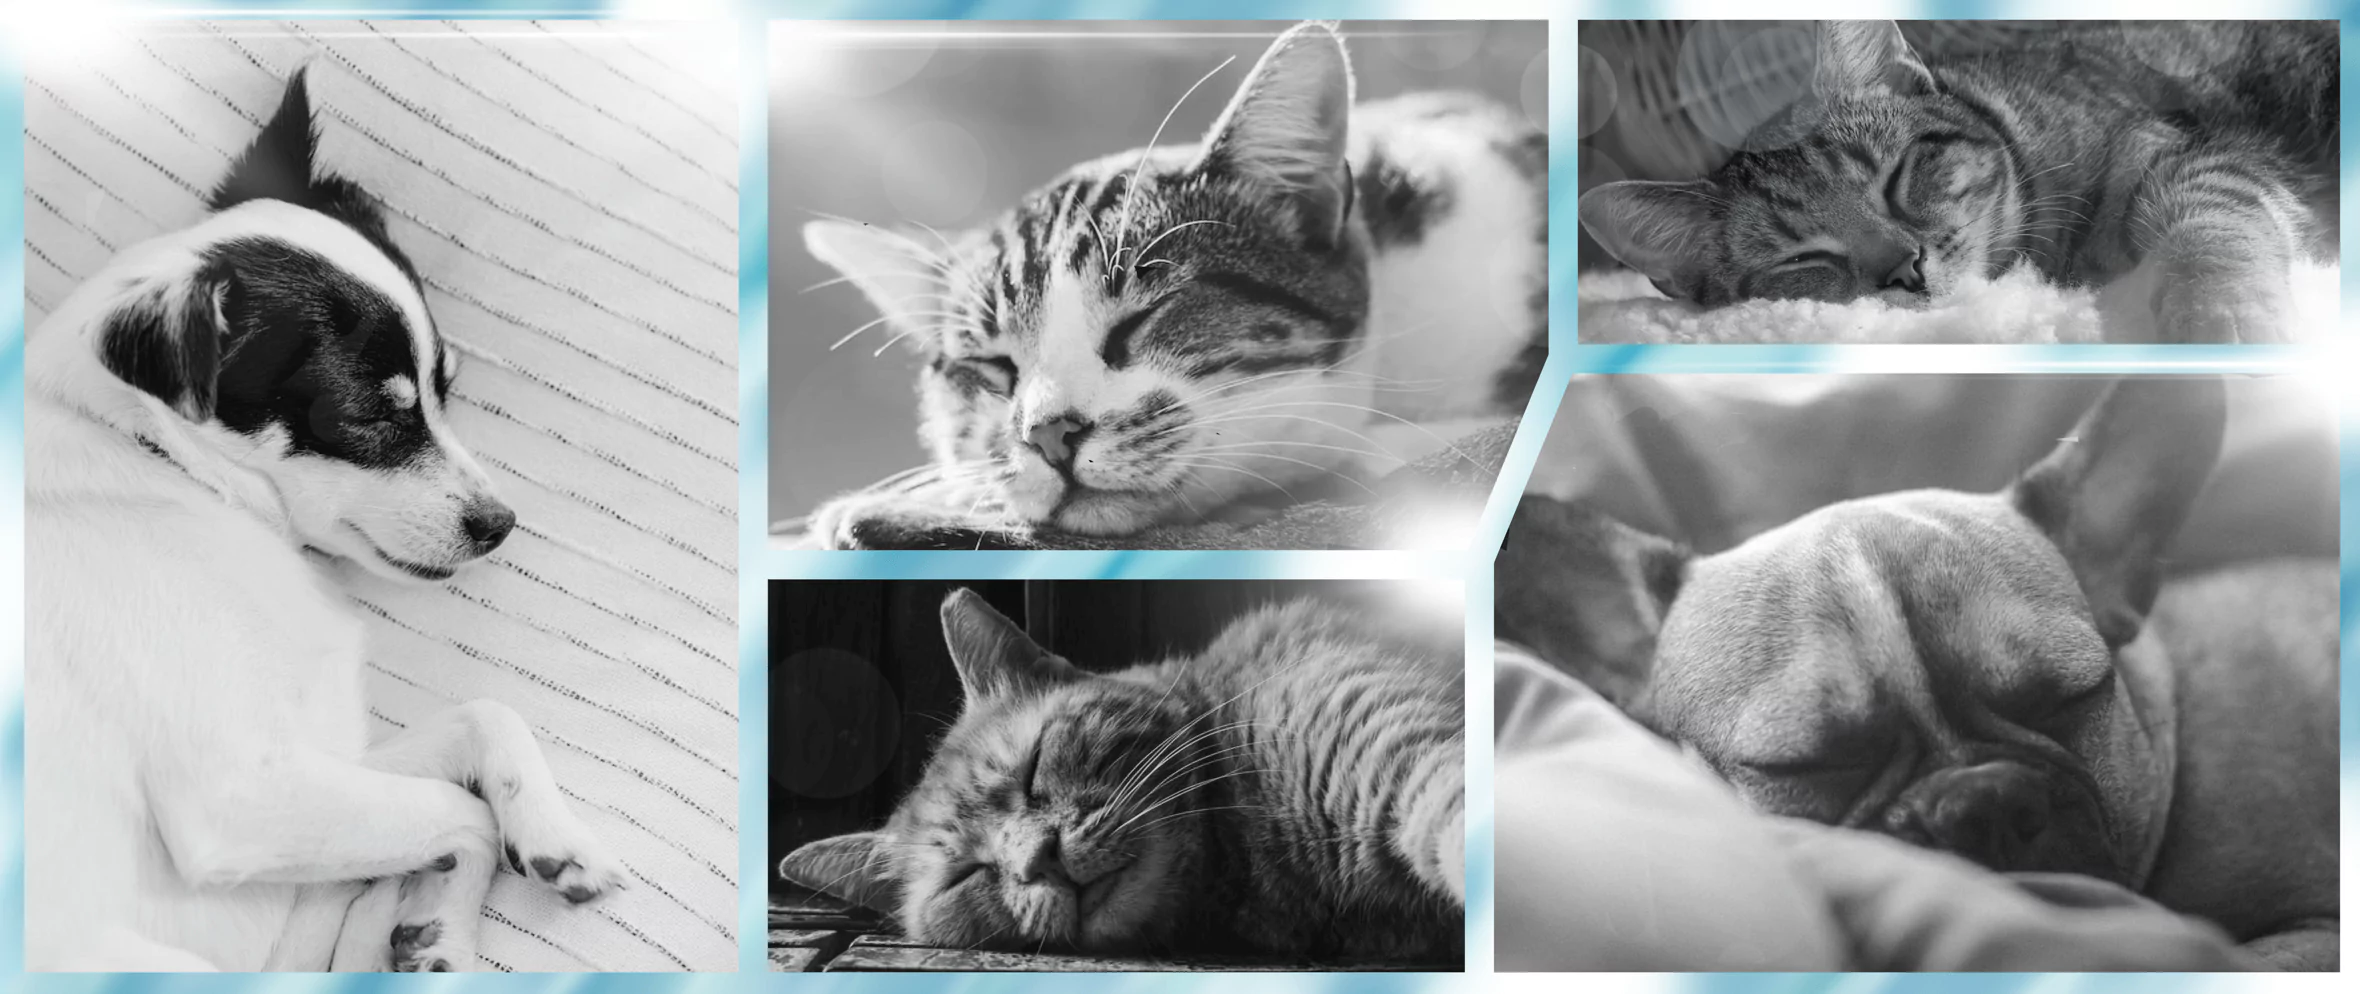 Black and white collage of cats and dogs for HolisticalVets' in-home pet euthanasia services in Ocean County, New Jersey (available in towns near you in 08005, 08006, 08008, 08050, 08087, 08092, 08527, 08533, 08701, 08721, 08722, 08723, 08724, 08731, 08732, 08733, 08734, 08735, 08738, 08739, 08740, 08741, 08742, 08751, 08752, 08753, 08754, 08755, 08756, 08757, 08758, and 08759)